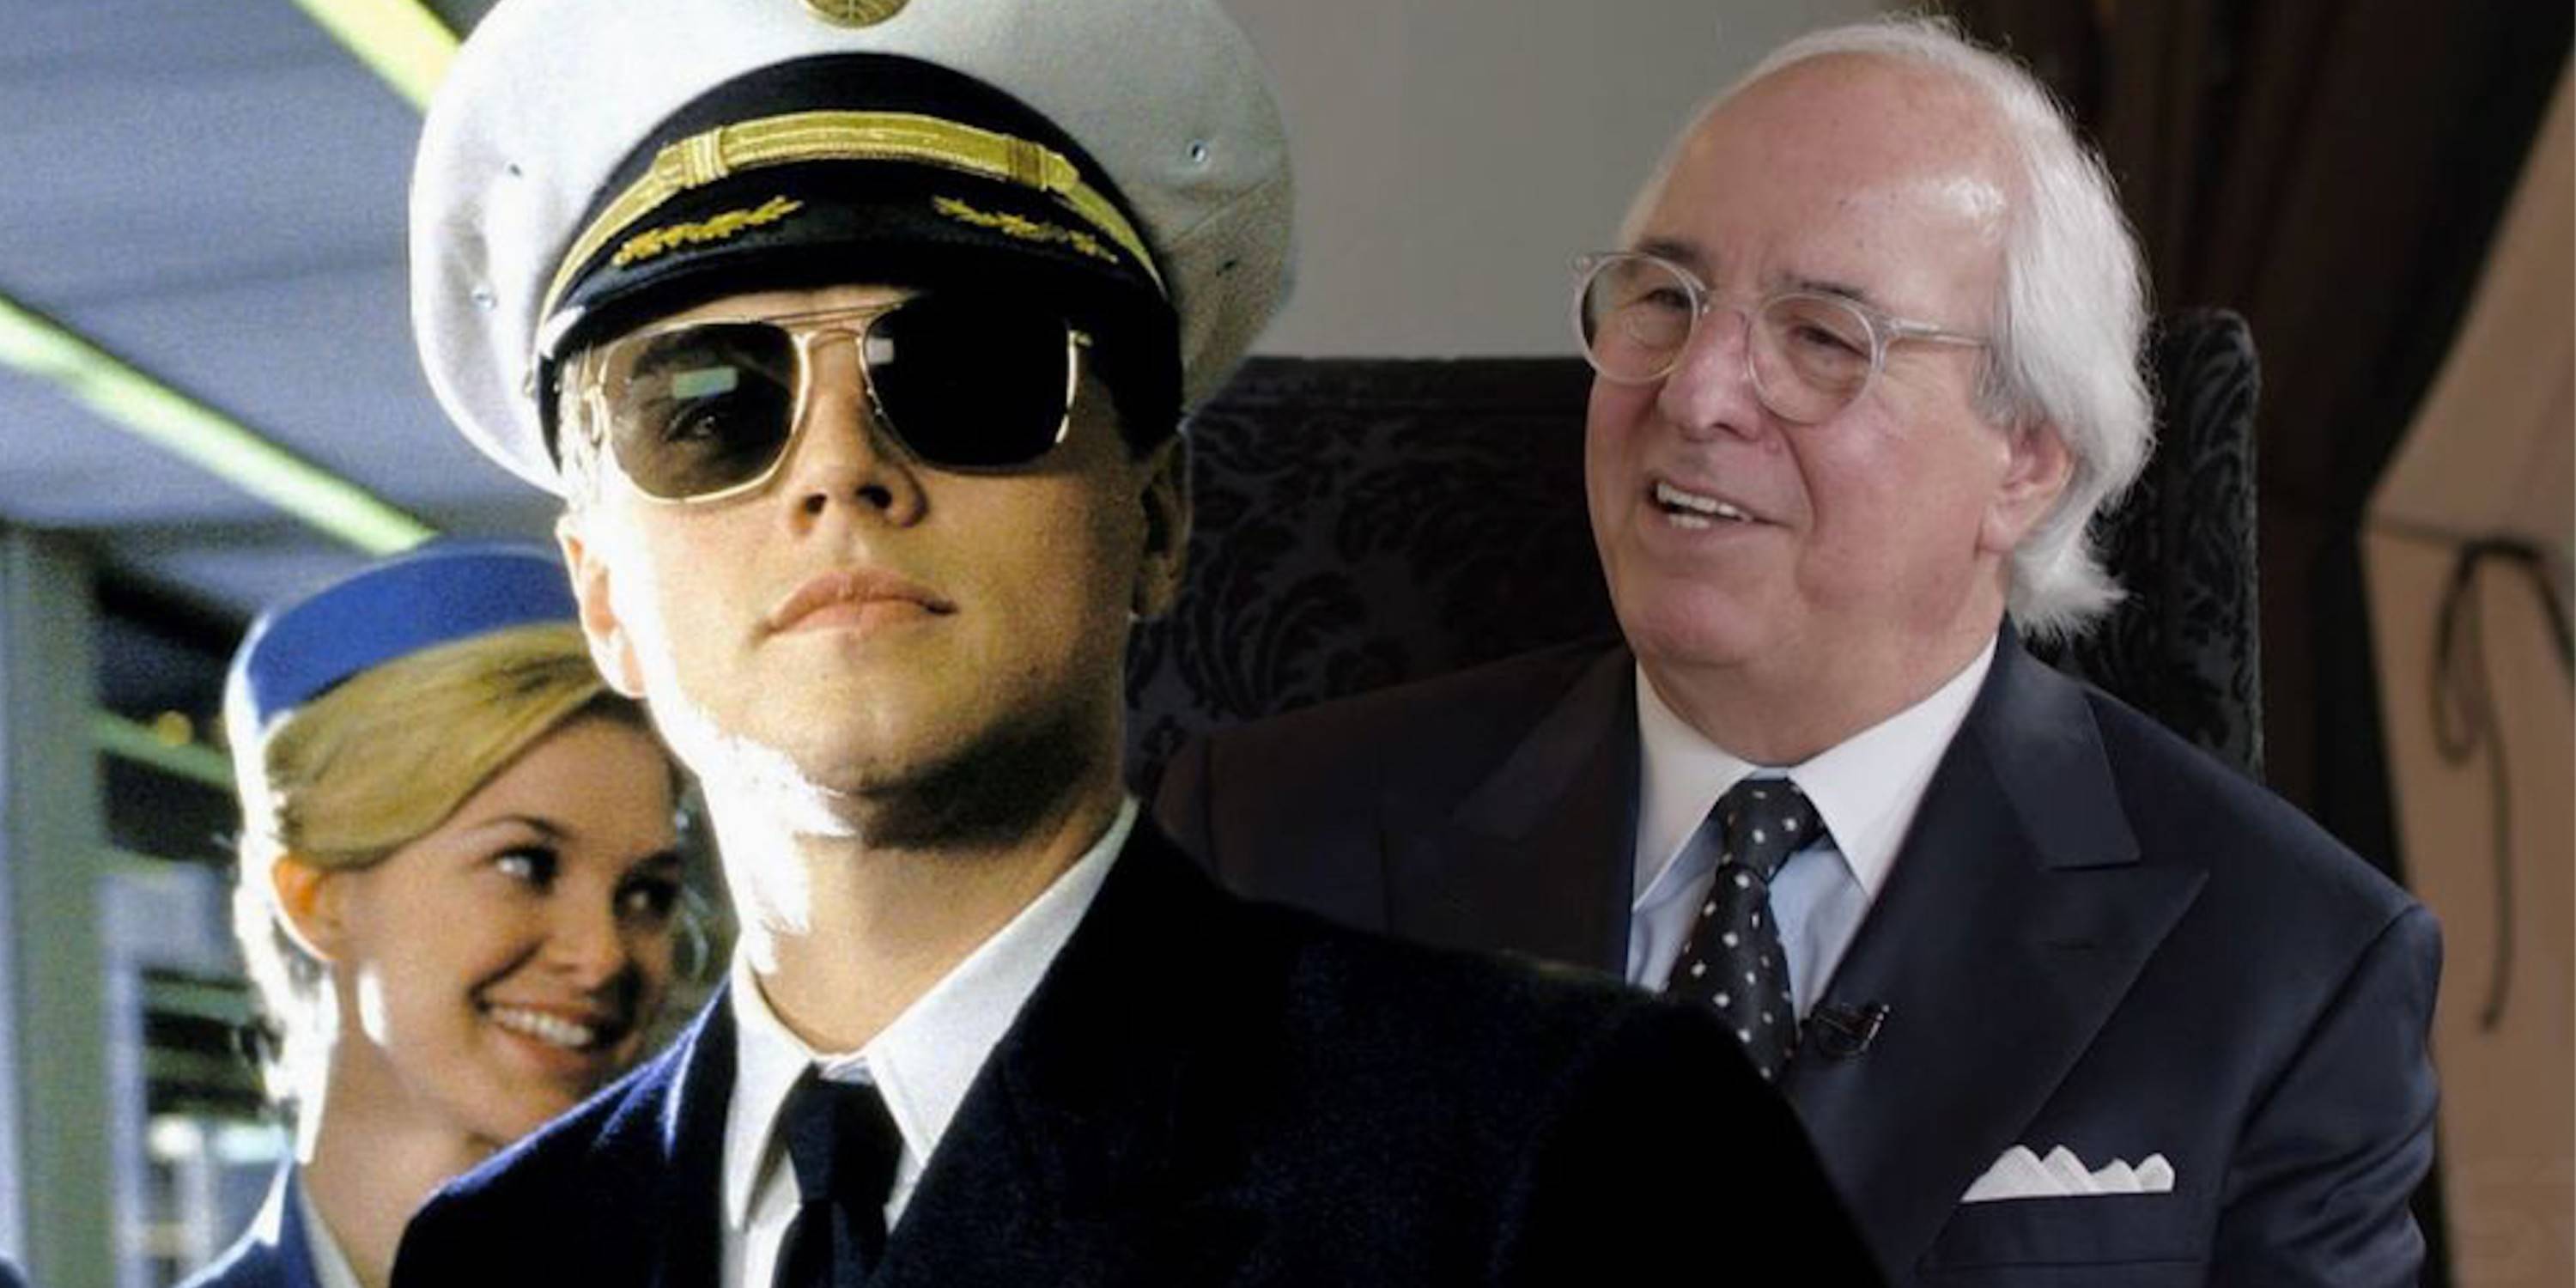  Leonardo DiCaprio jako Frank Abagnale W Catch Me If you Can